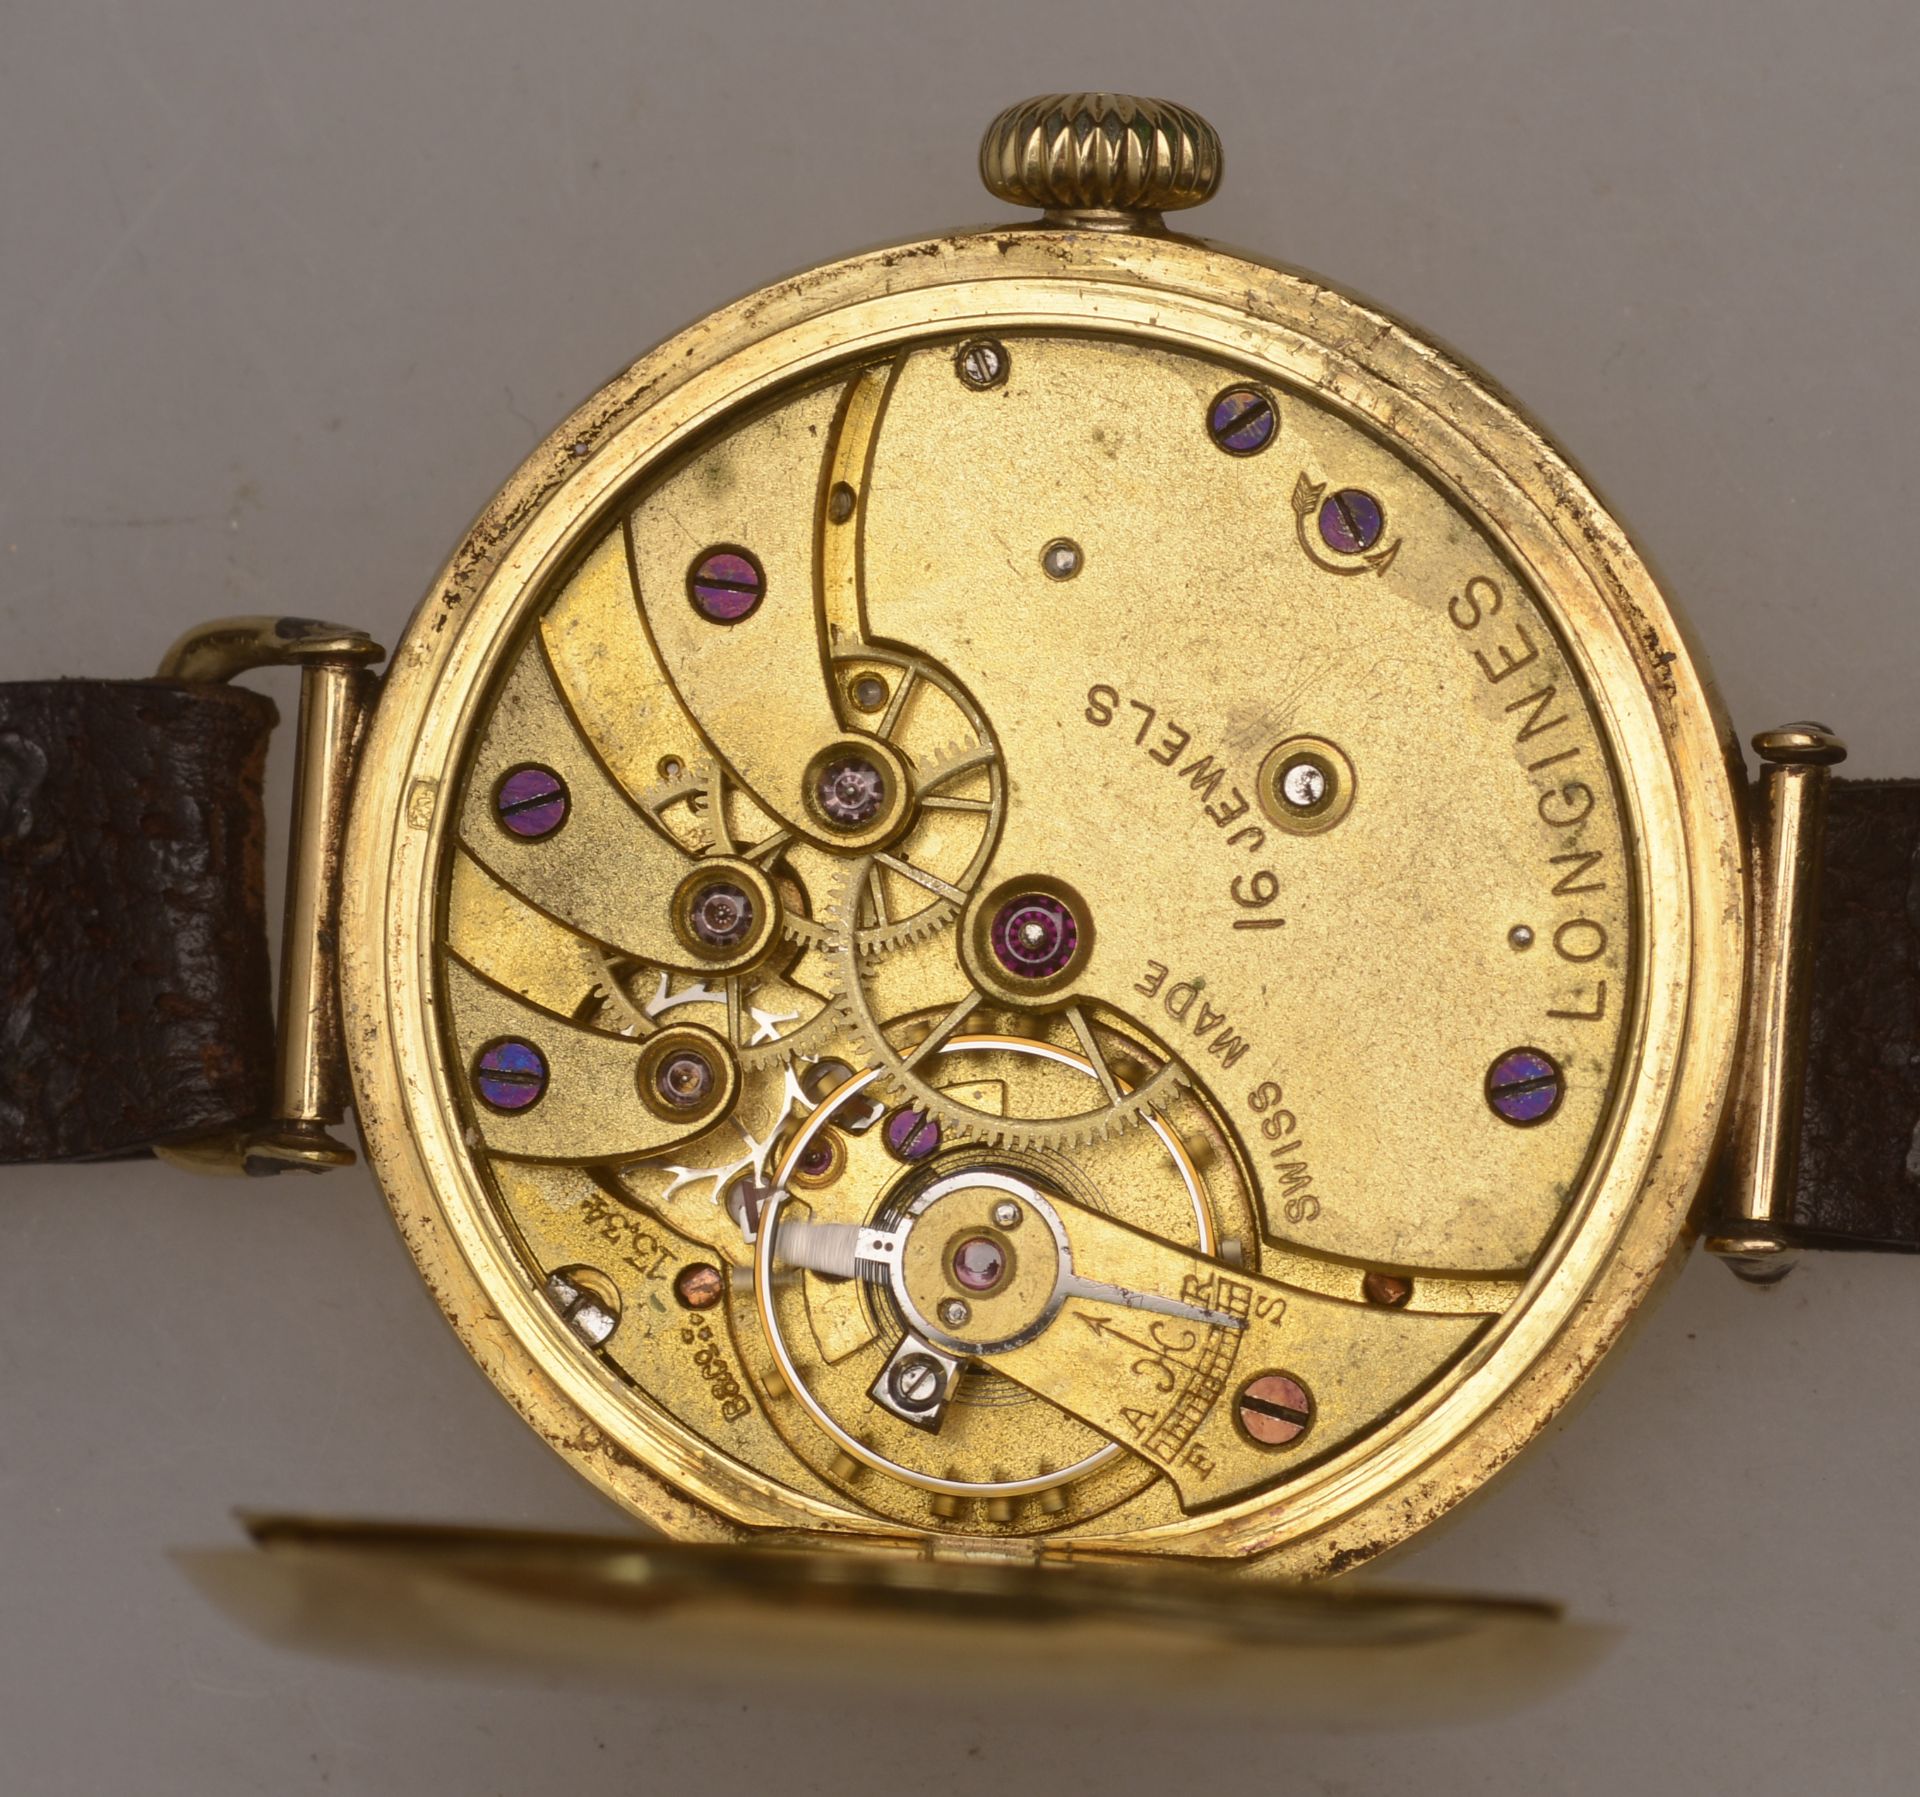 Longines: A gold trench watch, circa 1924. Movement: manual winding, 16 jewels. Dial: whit... - Bild 3 aus 3